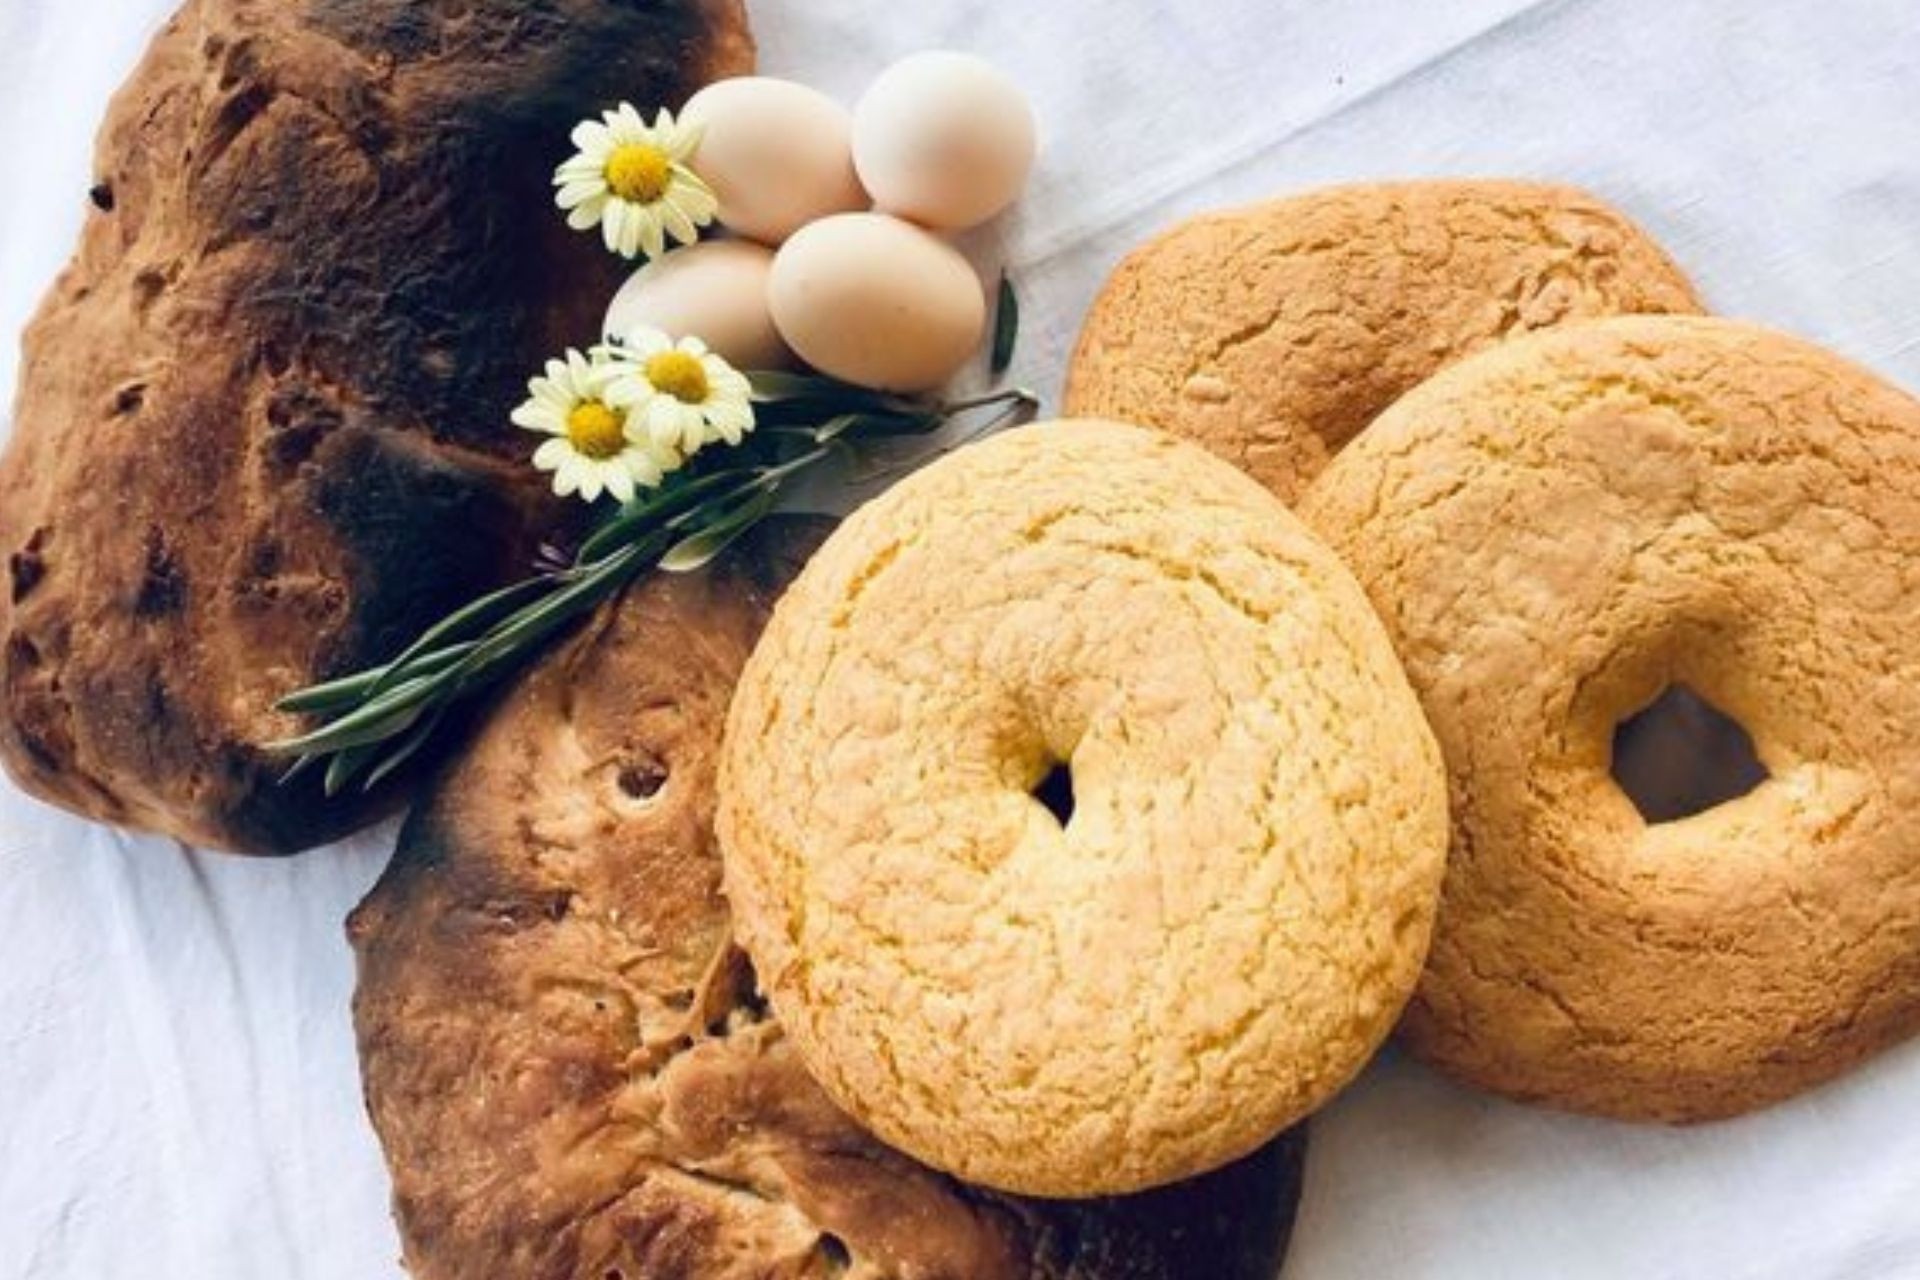 Easter recipes and traditions in Valdichiana Senese